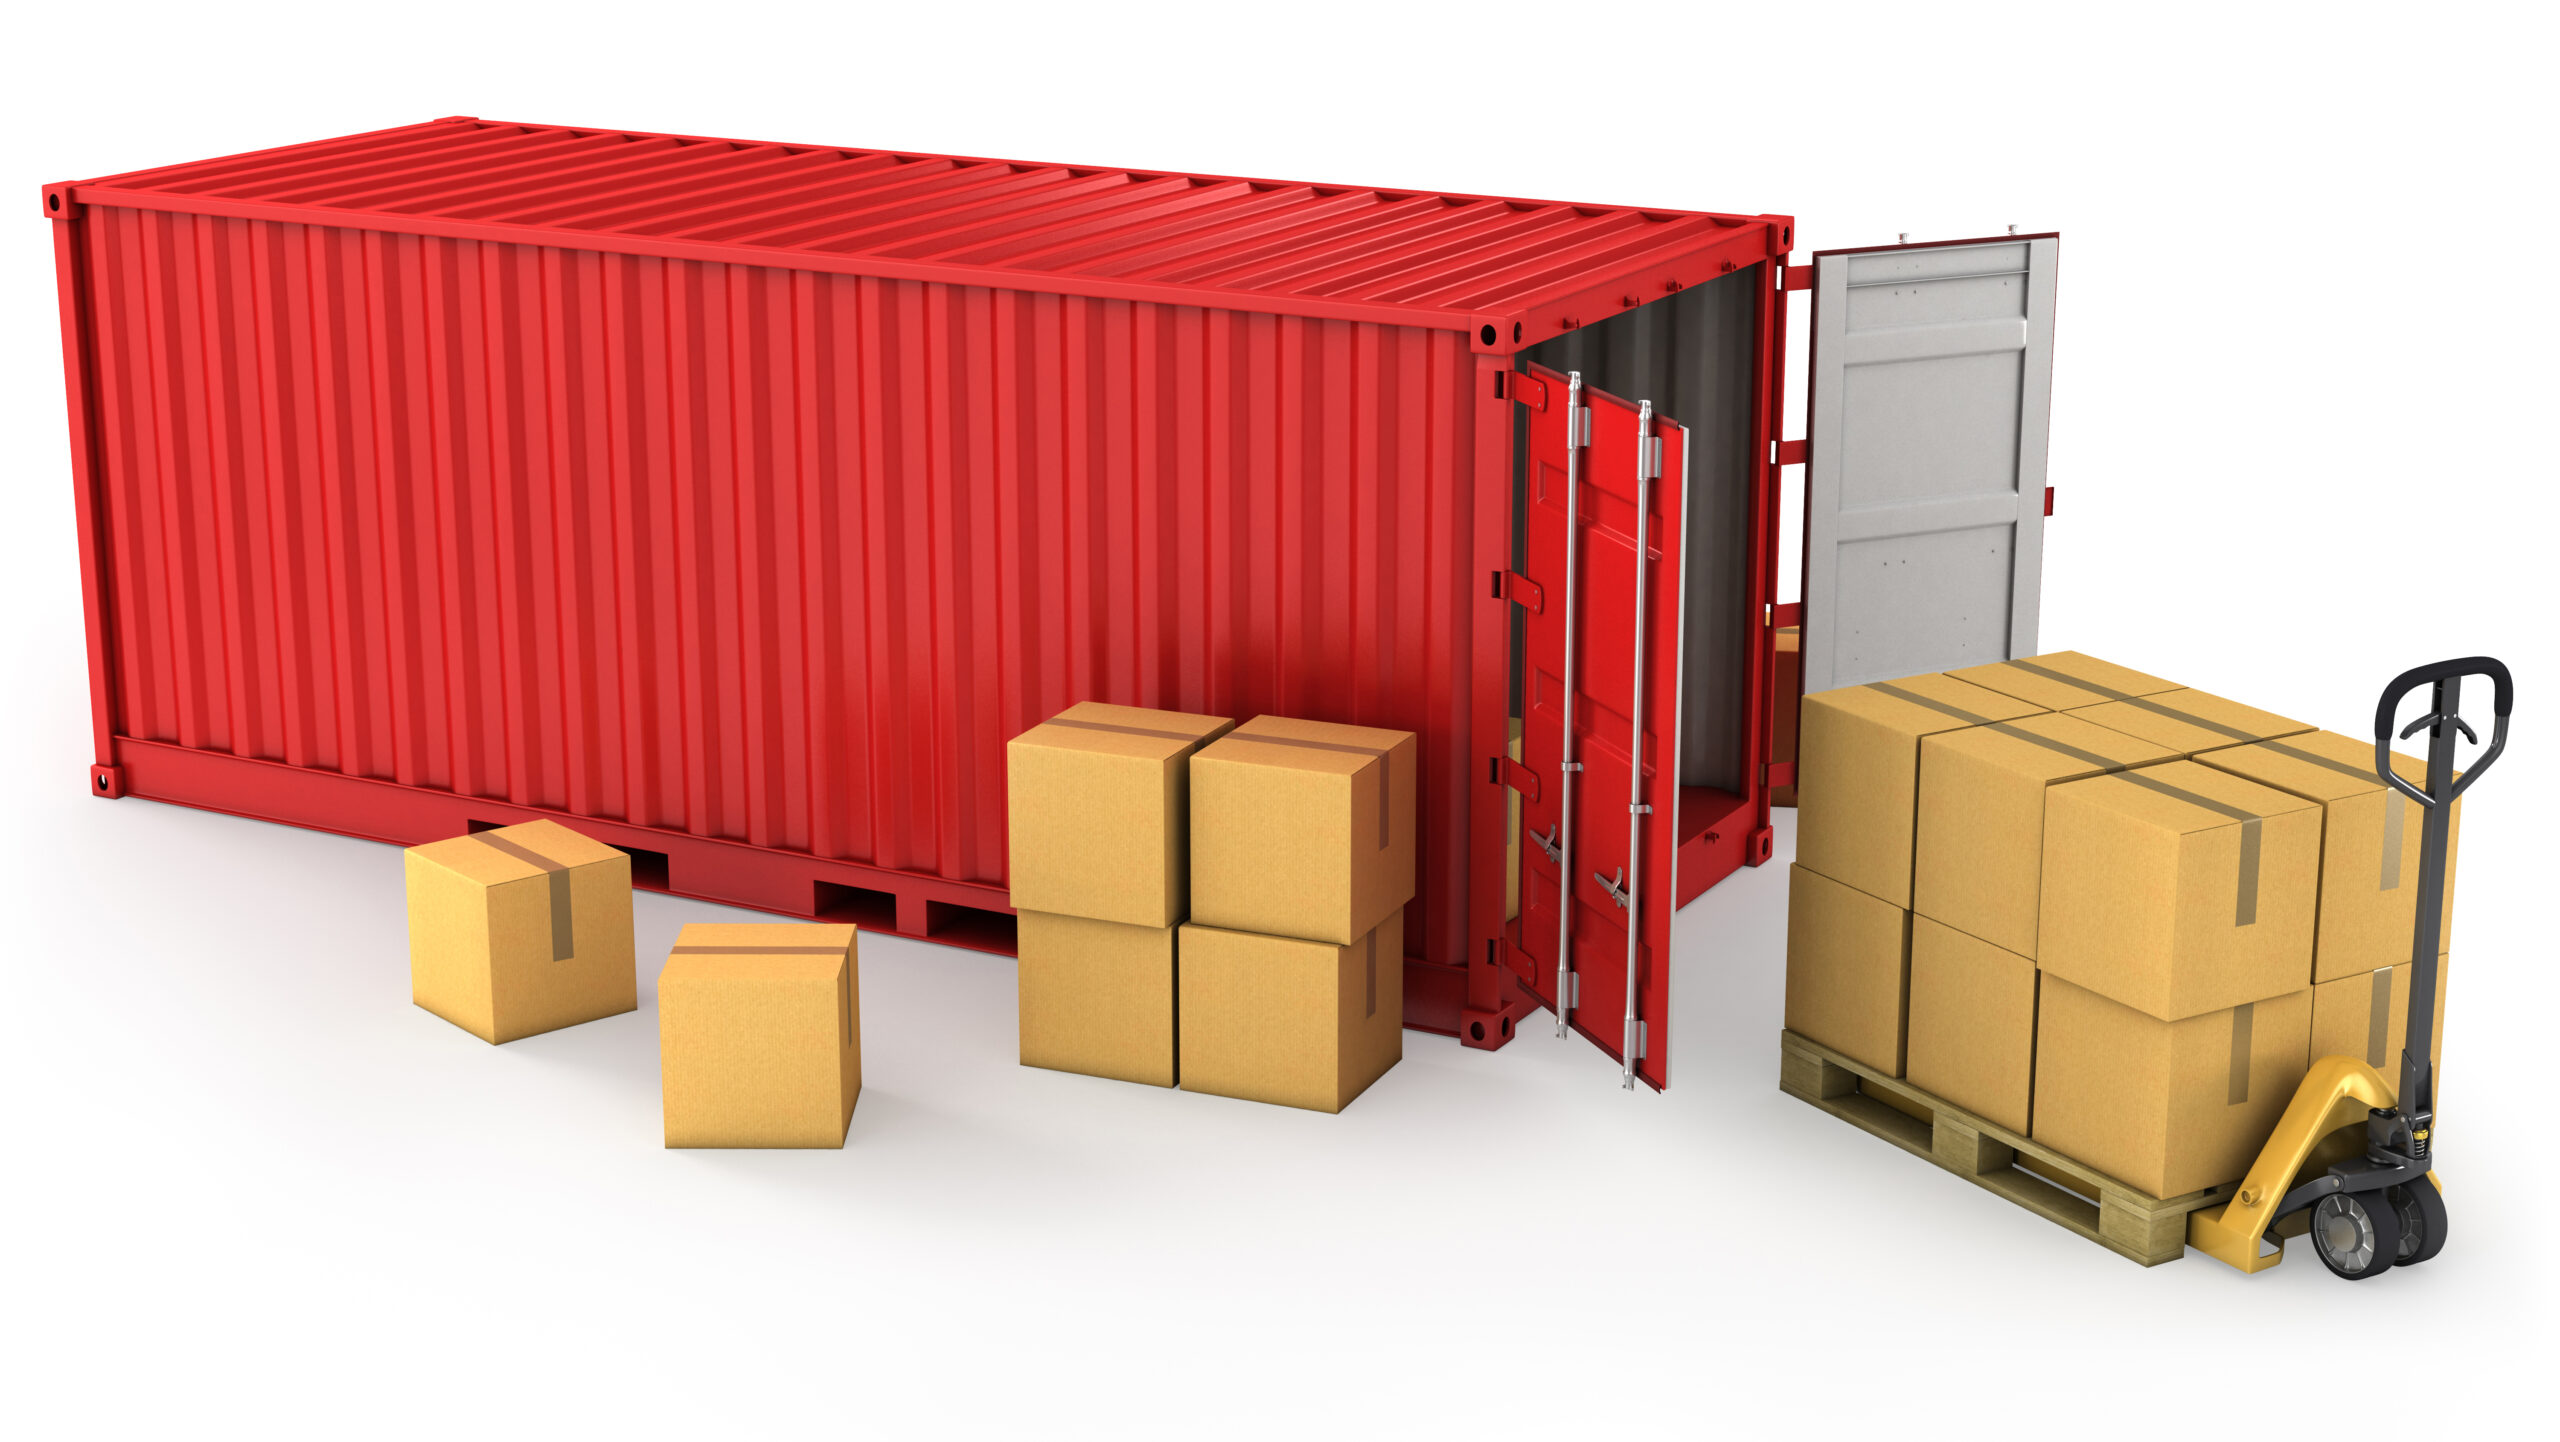 Red container and carton boxes on a pallet